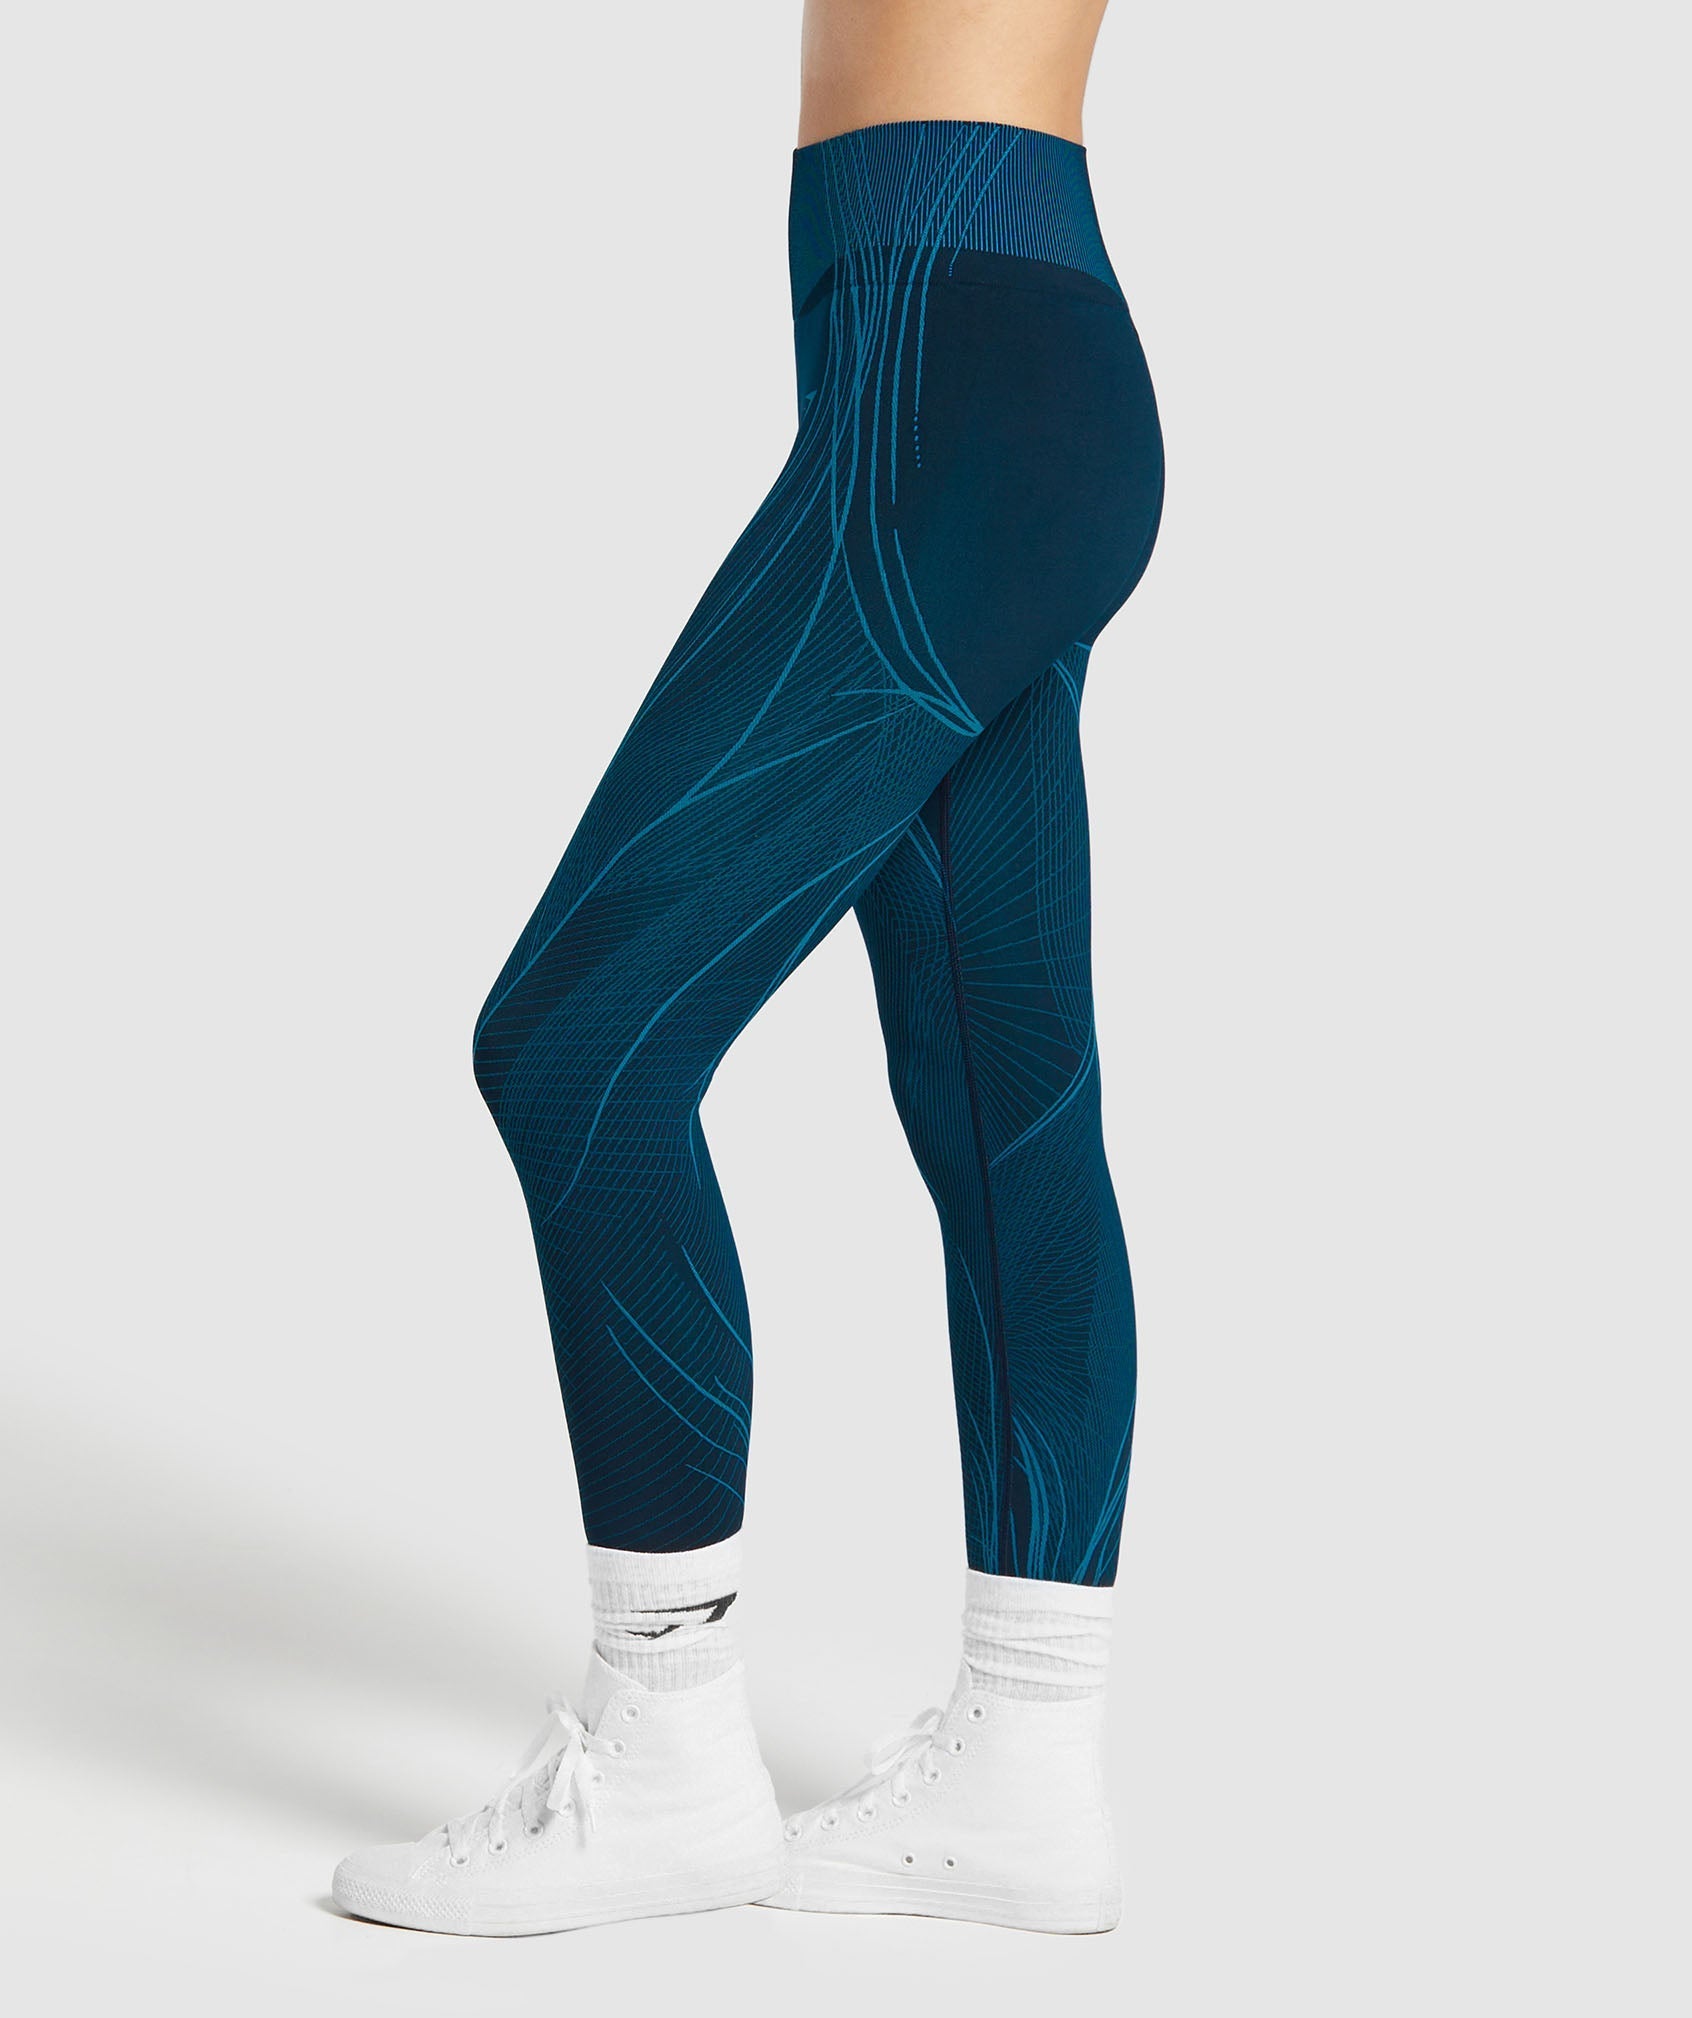 GS x Analis Leggings in Midnight Blue/Lats Blue - view 4